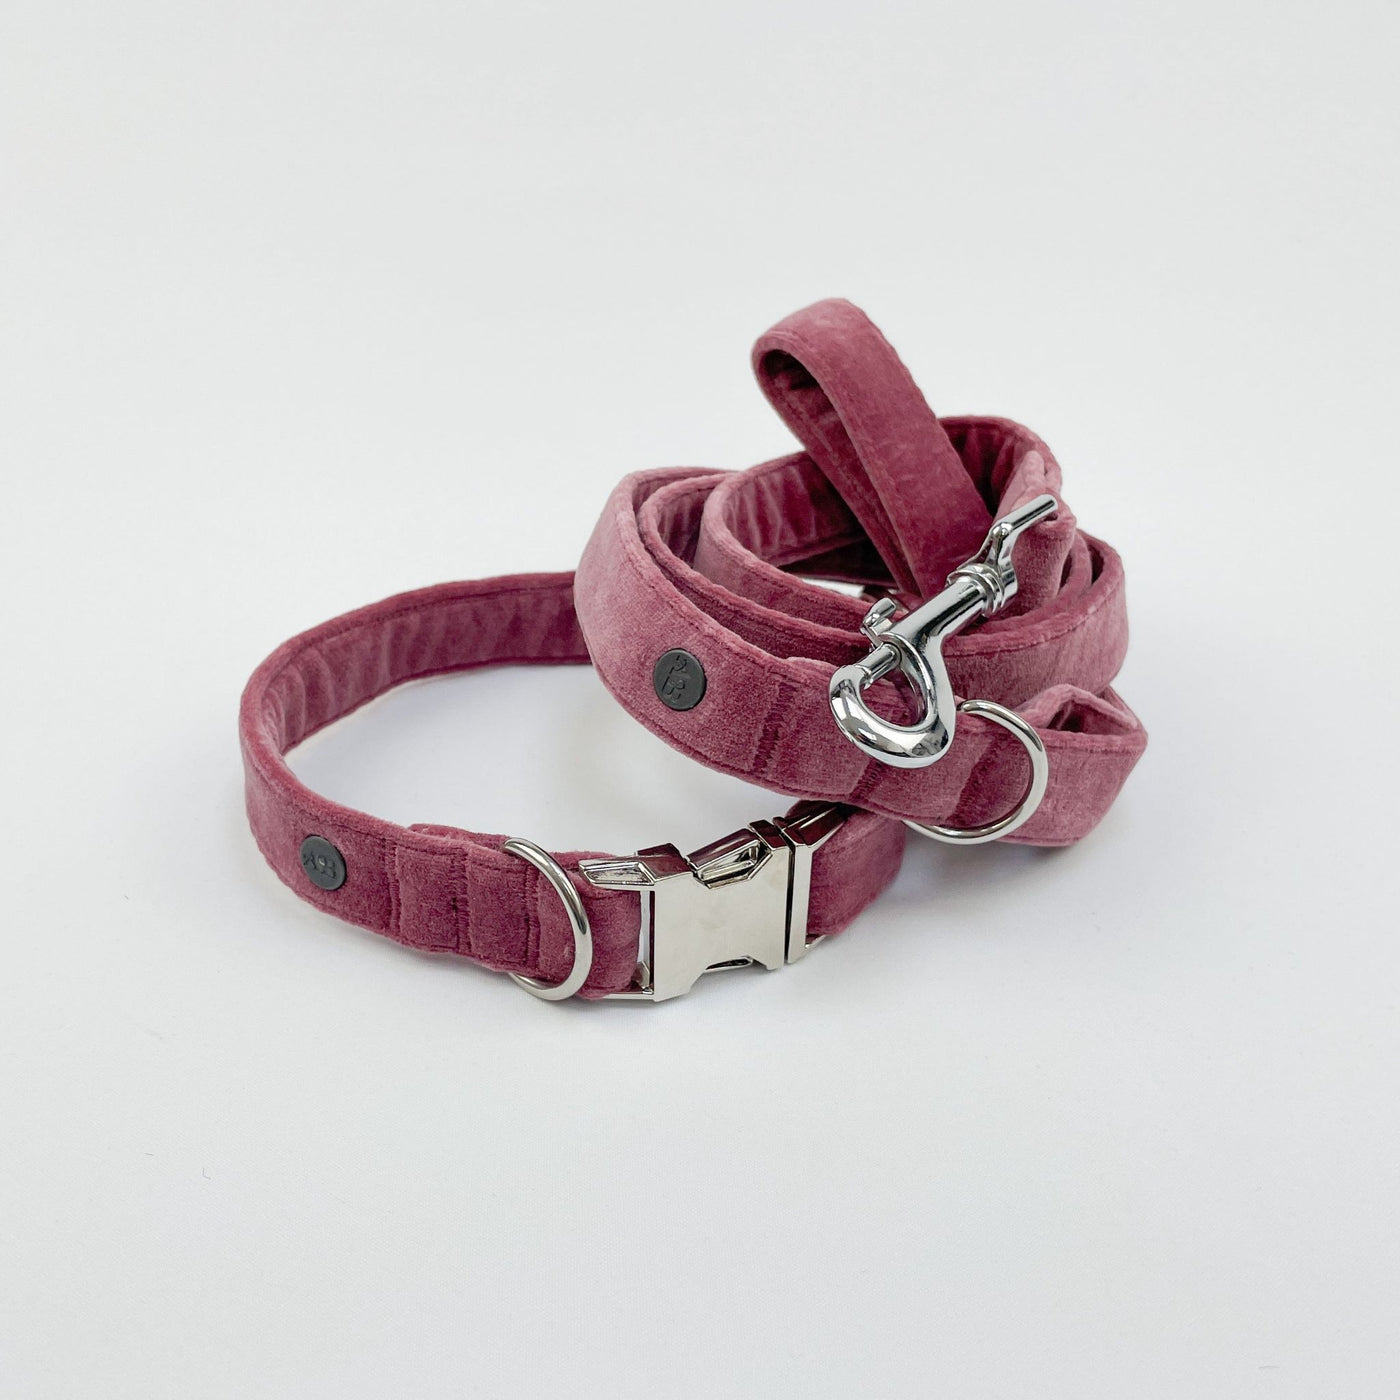 Luxury Blush Pink Velvet Dog Collar teamed with matching lead.